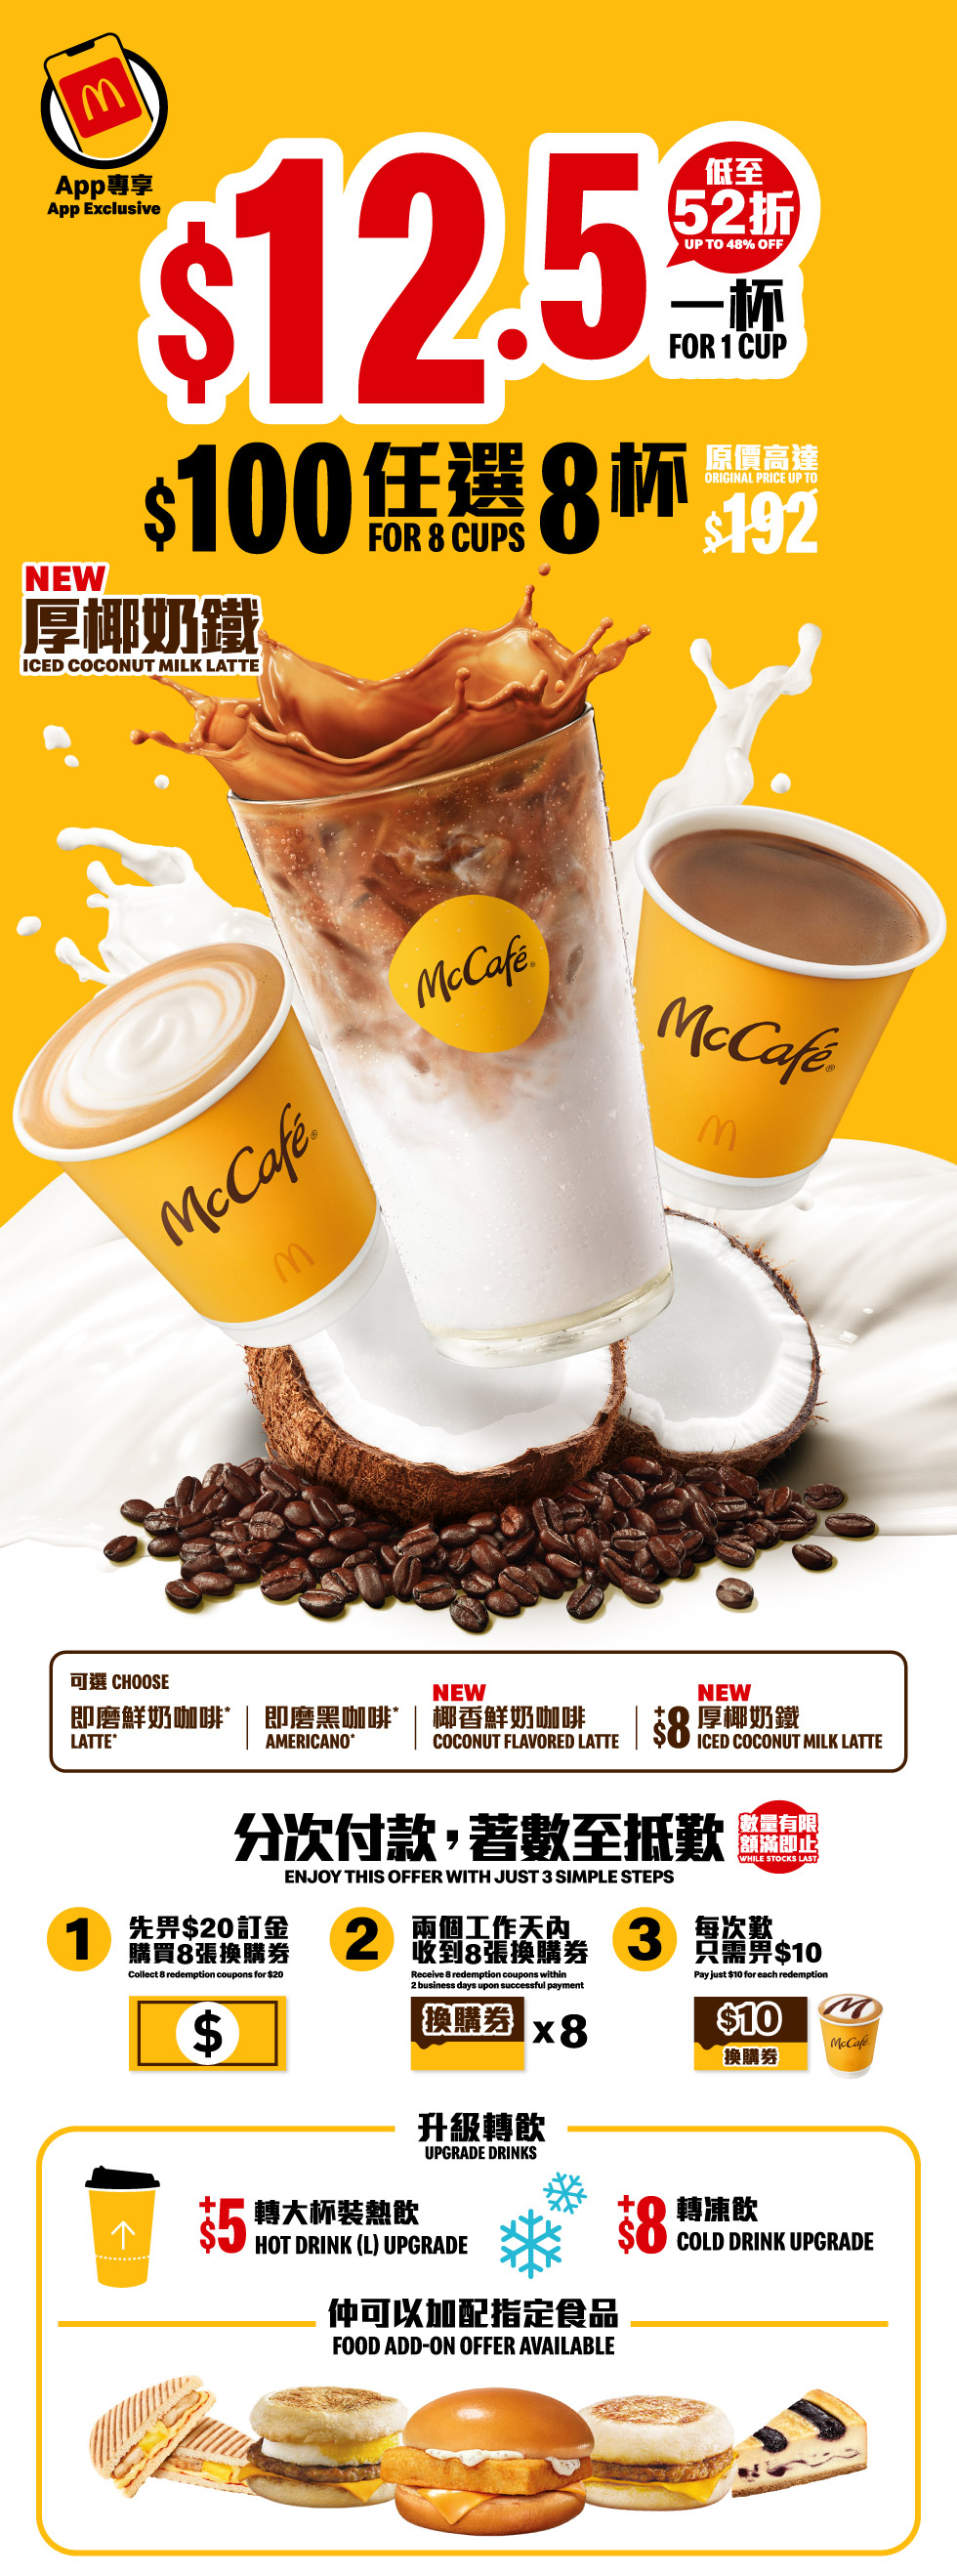 【Exclusive offer on McDonald's App📱: Get the best deals at McDonald's😍 $12.5 for McCafé coffee 🔥 In all 250 McDonald’s 🌟！】